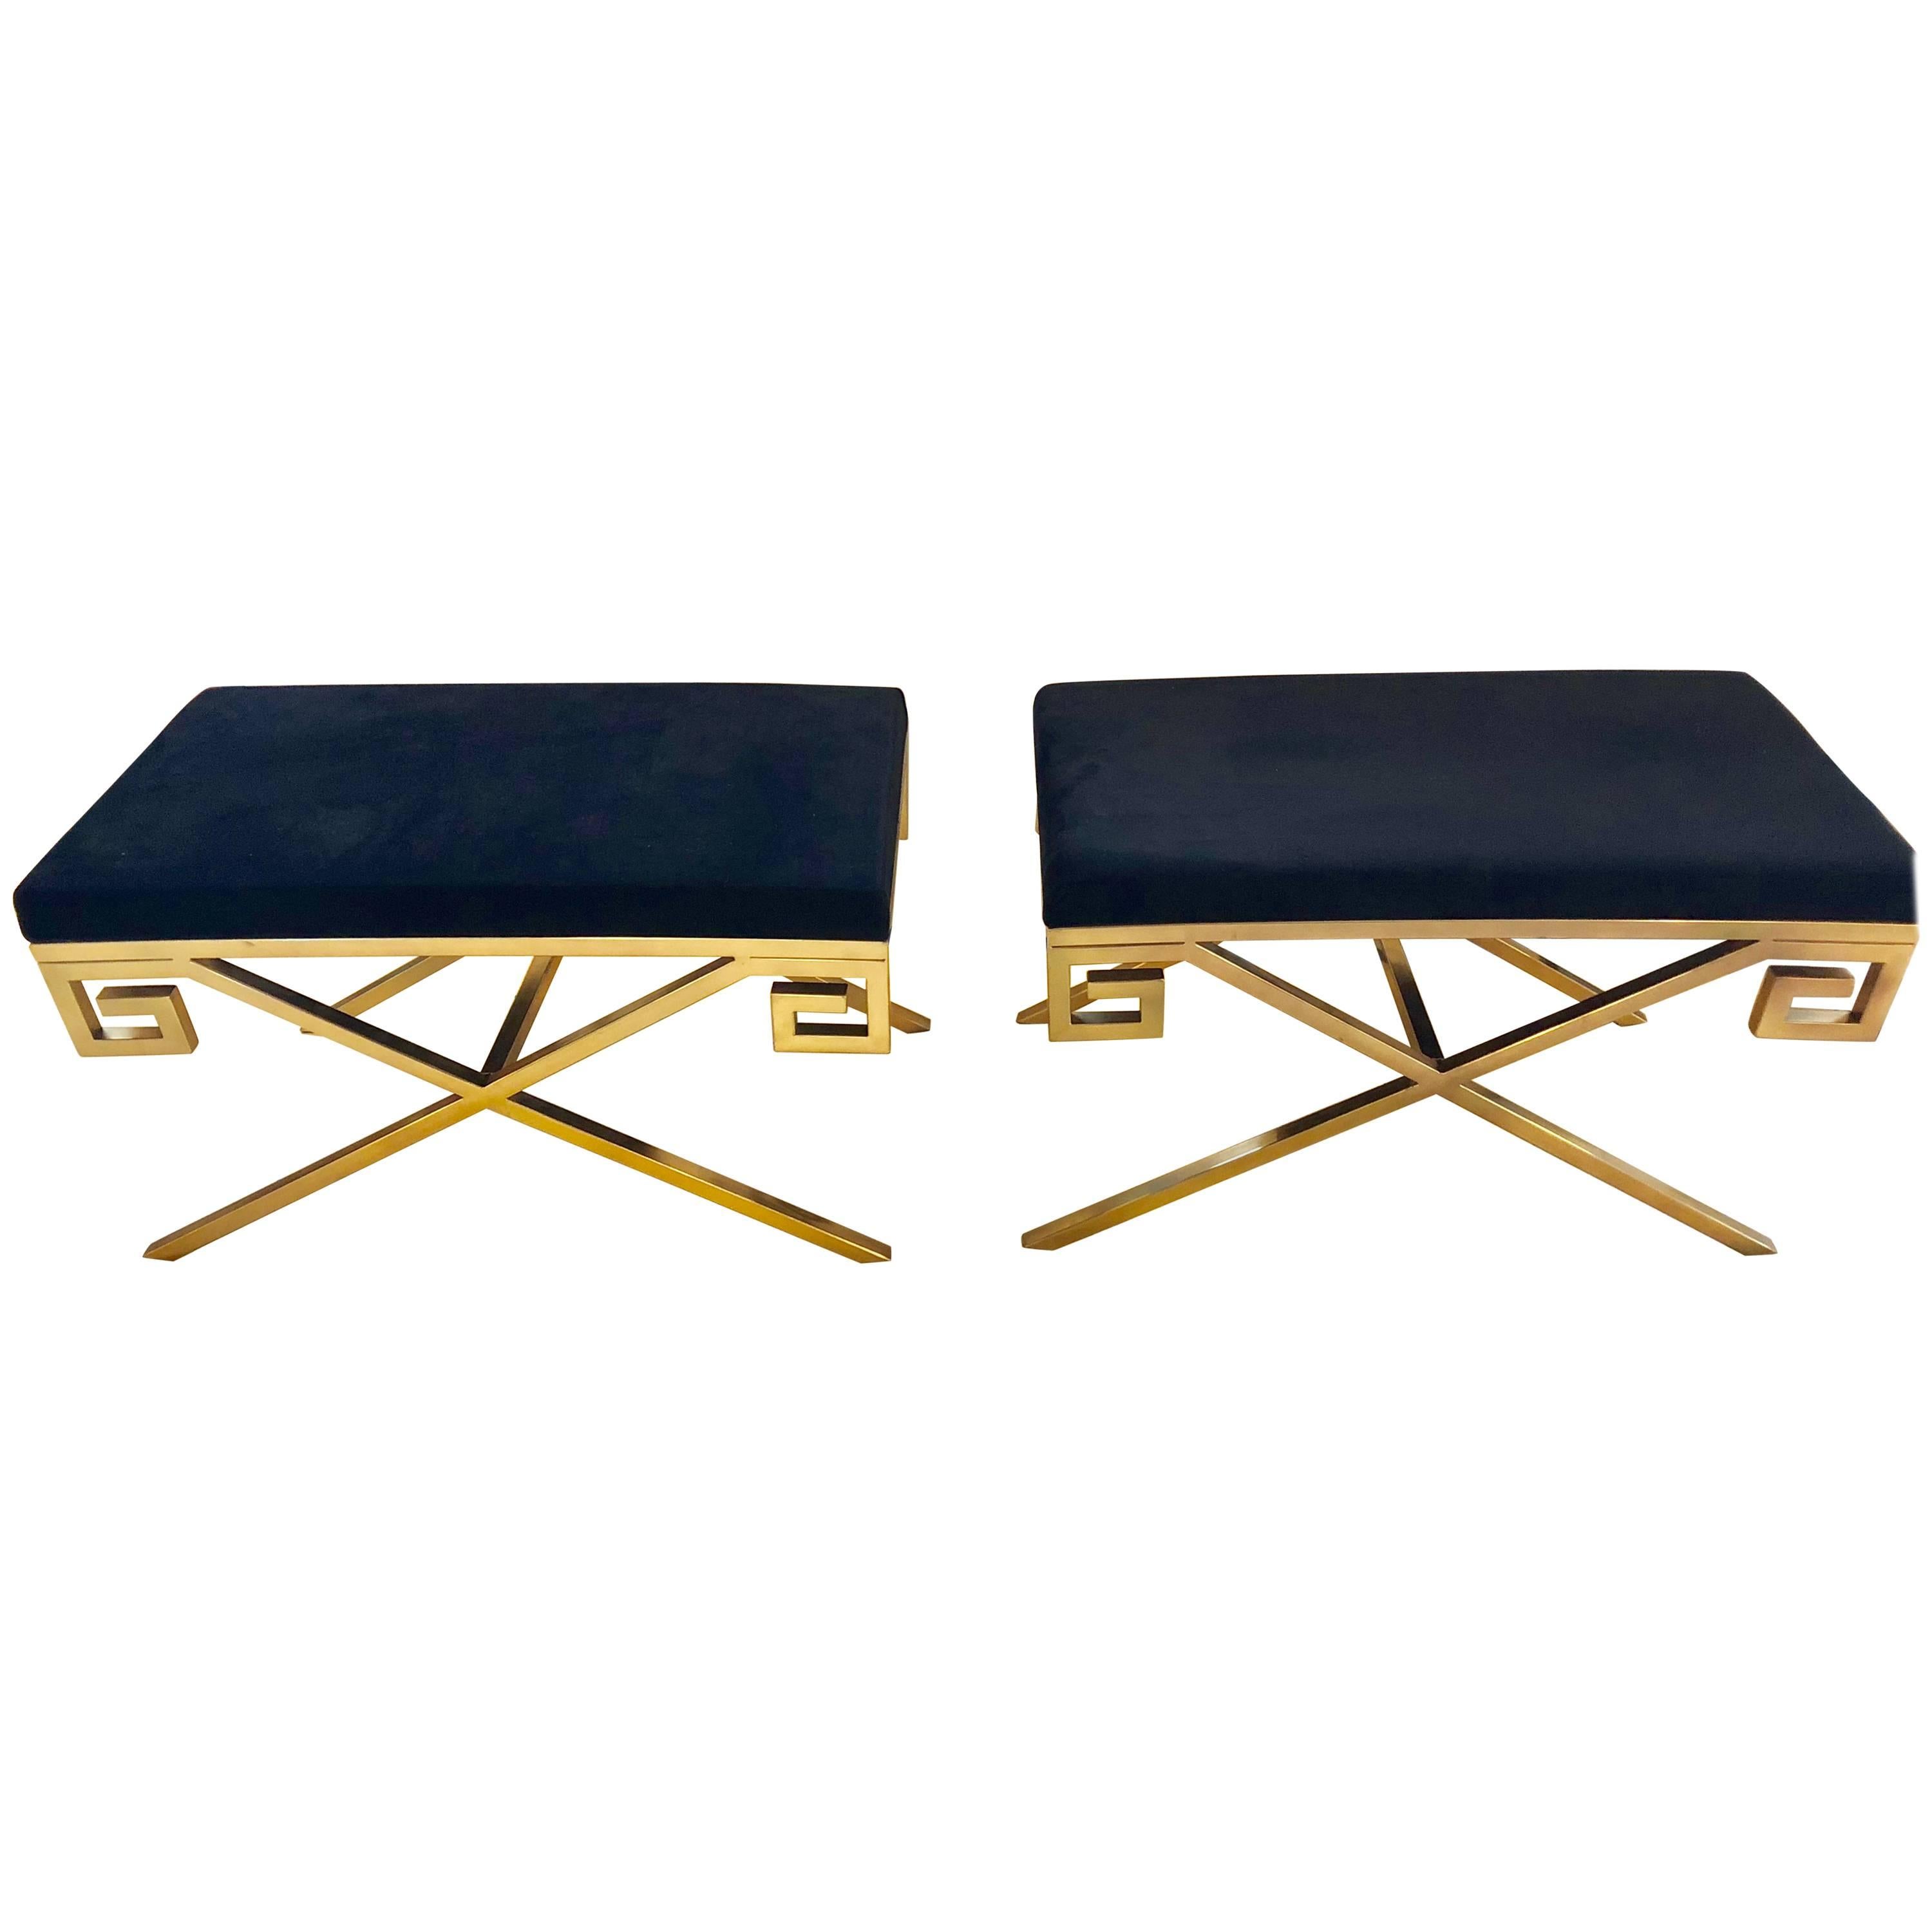 Pair of Gold Tone Metal and Black Contemporary Greek Key Benches or Footstools